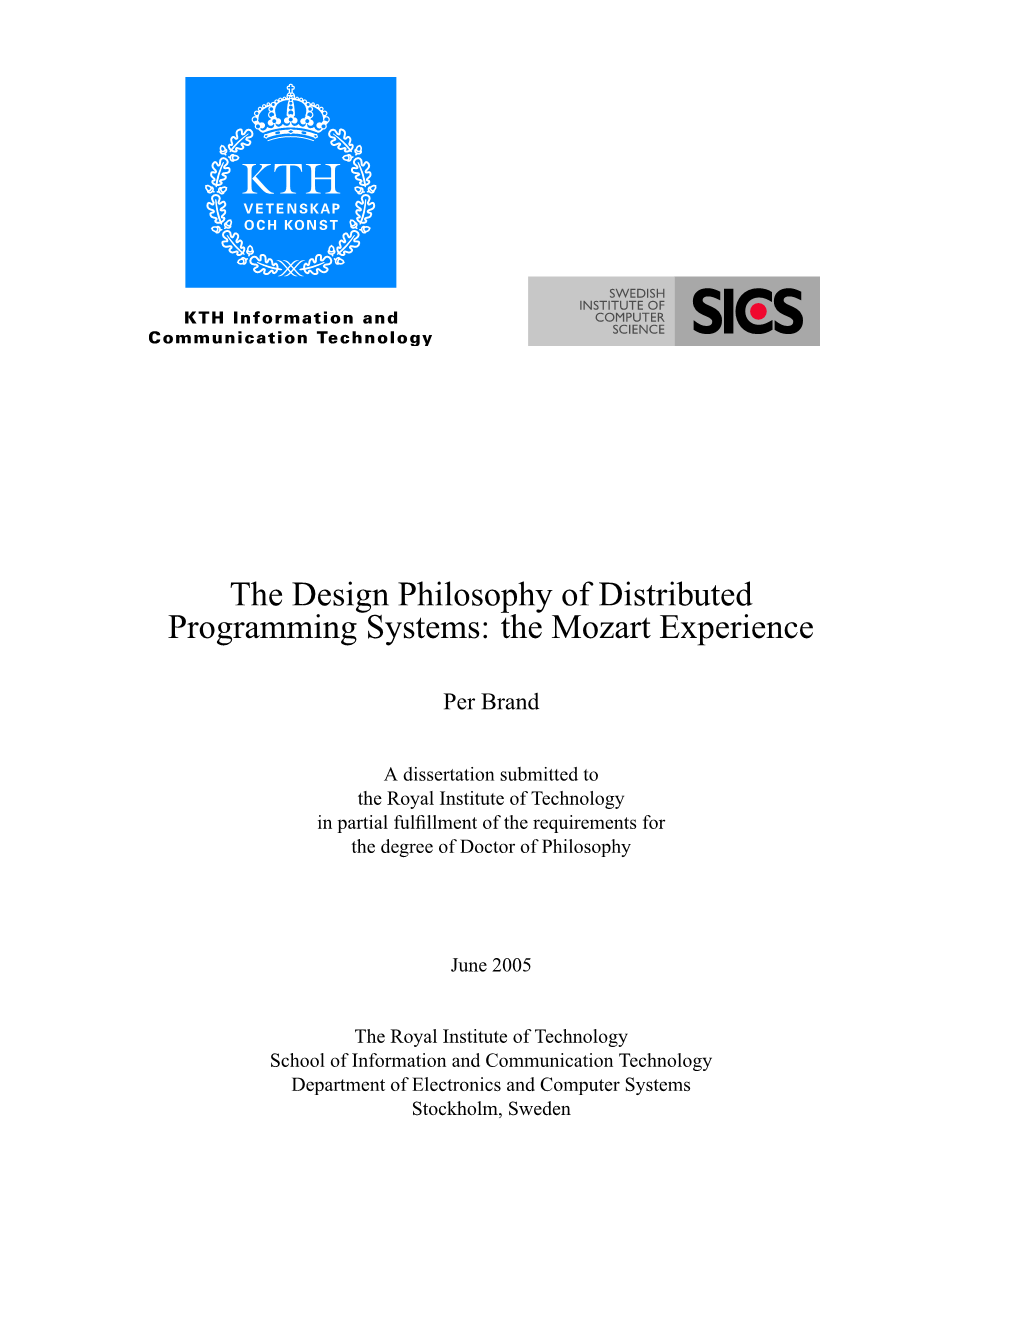 The Design Philosophy of Distributed Programming Systems: the Mozart Experience